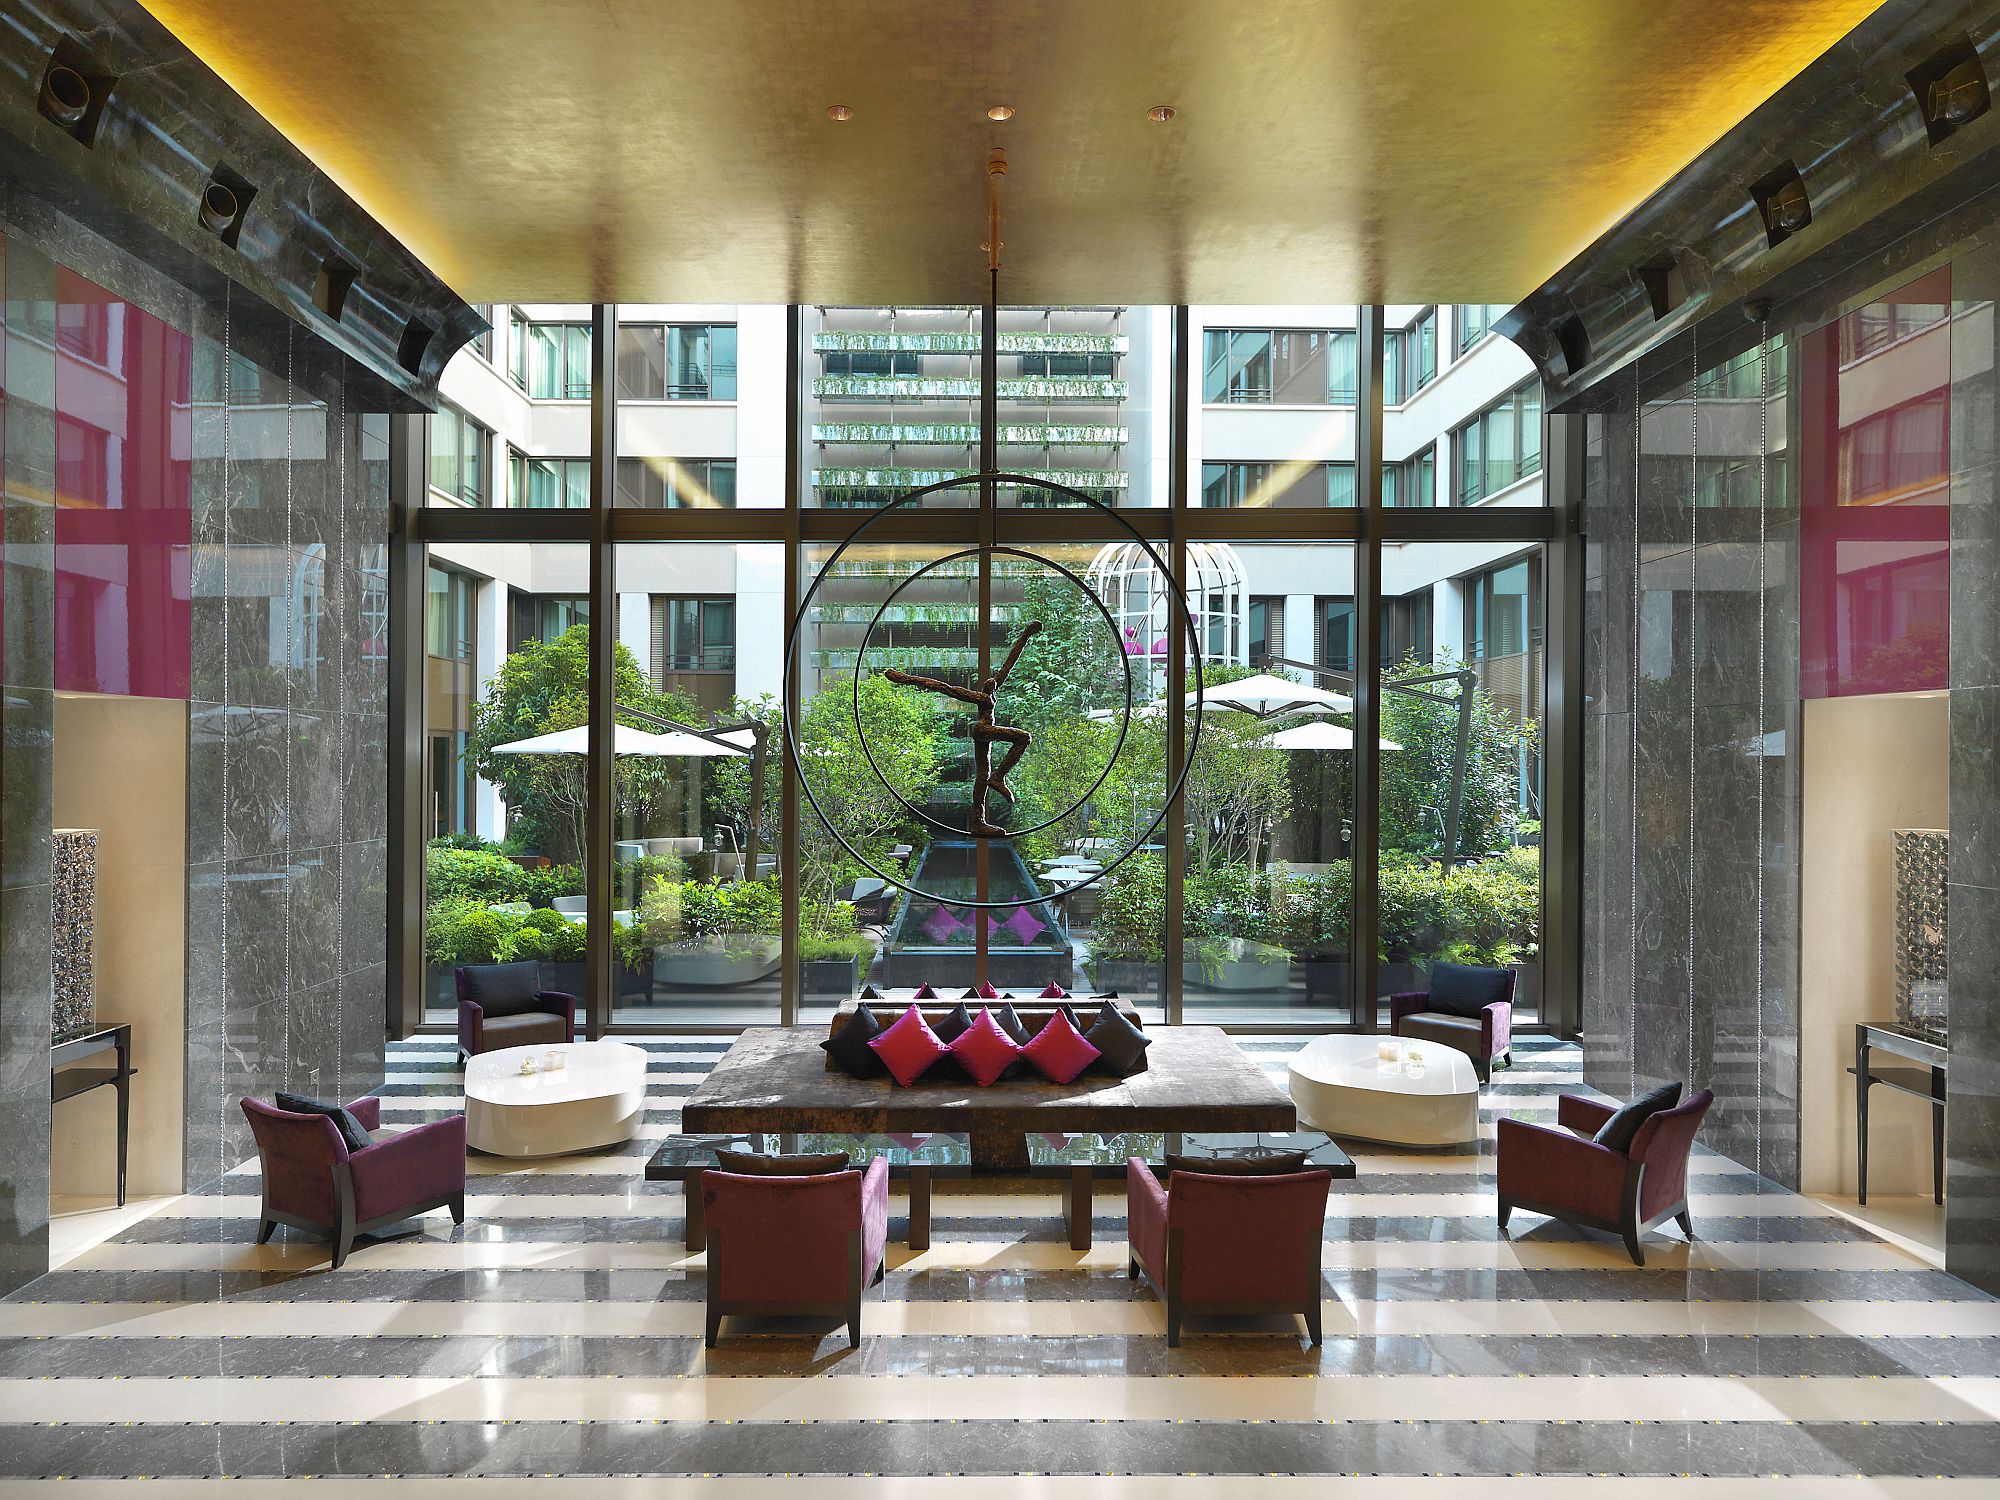 Greenery becomes an important part of the Mandarin Oriental, Paris